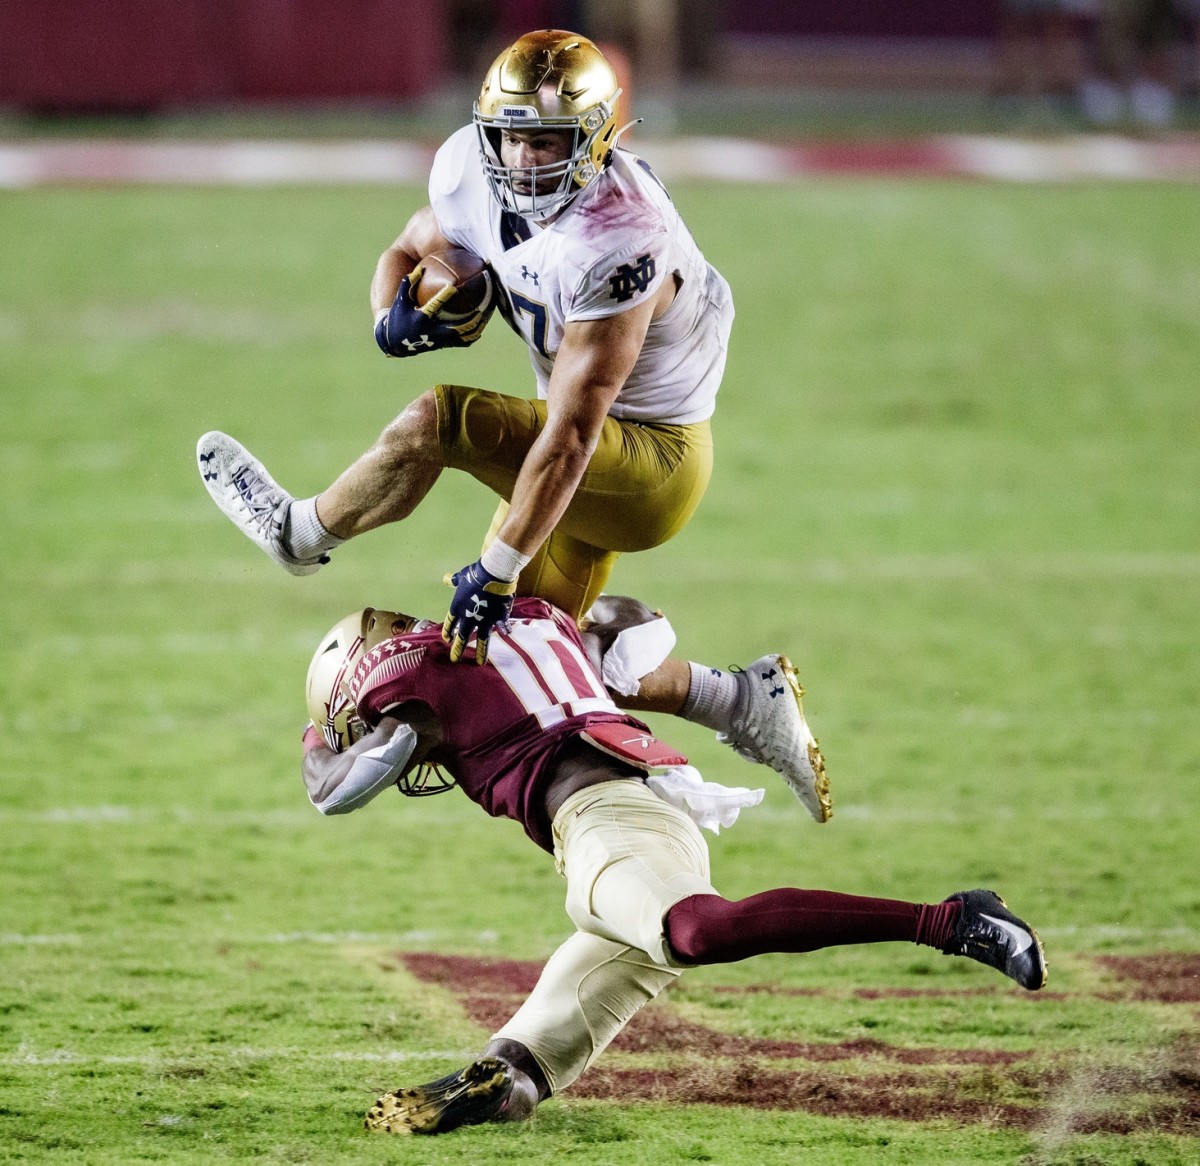 Notre Dame Fighting tight end Michael Mayer (87) jumps over Florida State defensive back Jammie Robinson (10). © Alicia Devine/Tallahassee Democrat via Imagn Content Services, LLC